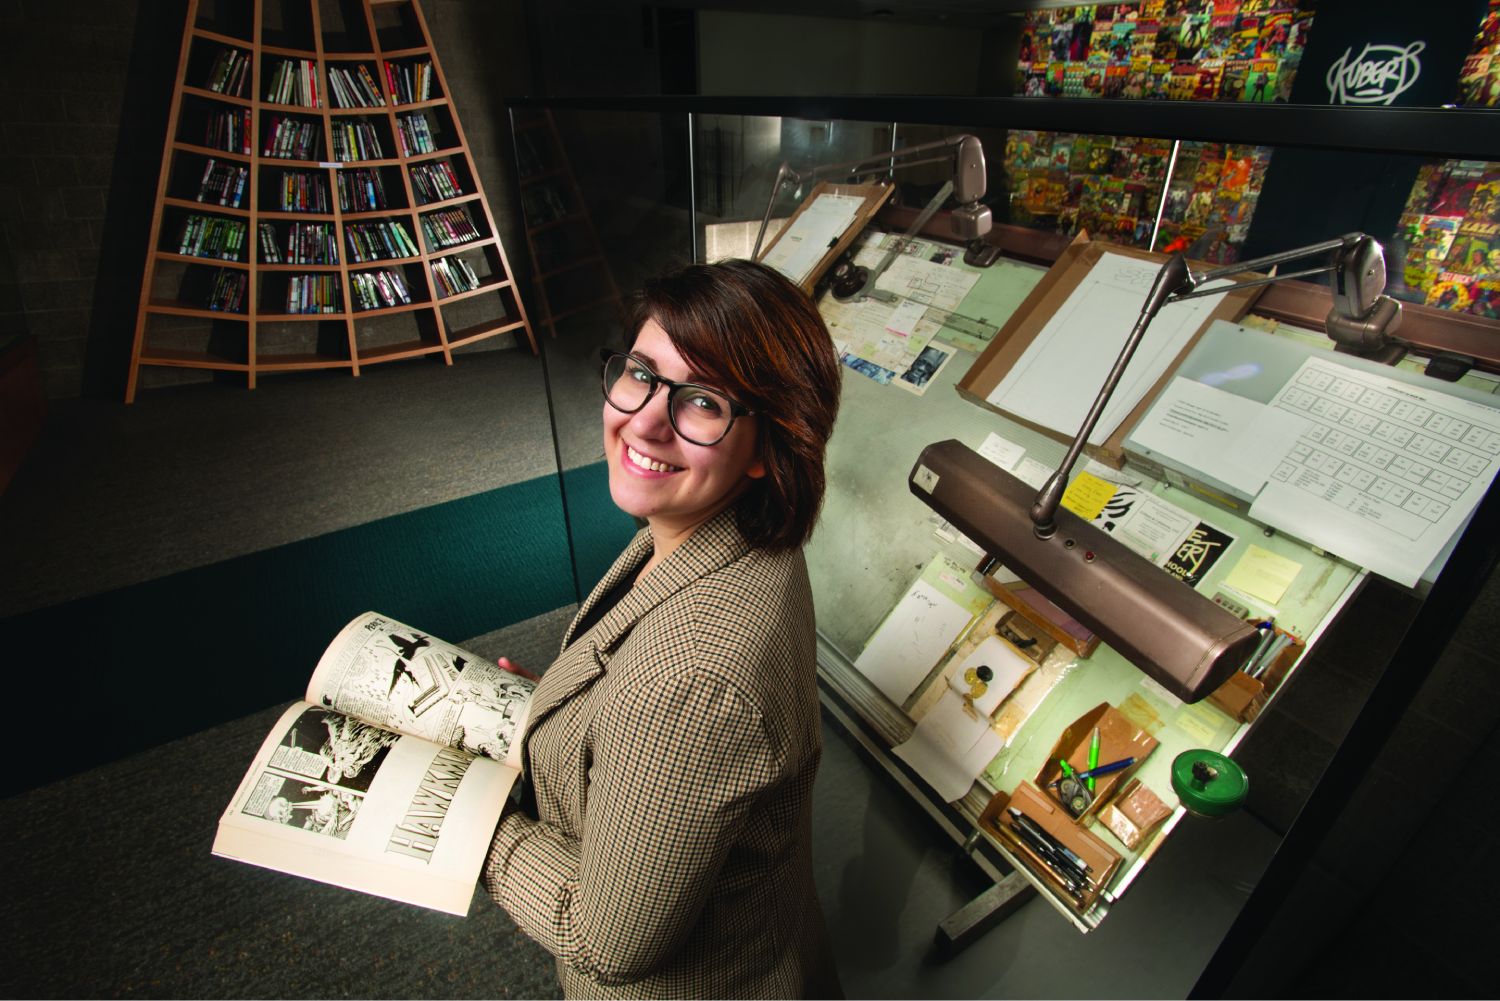 Leah Humenuck standing by a drafting table with a book open and looking over her shoulder